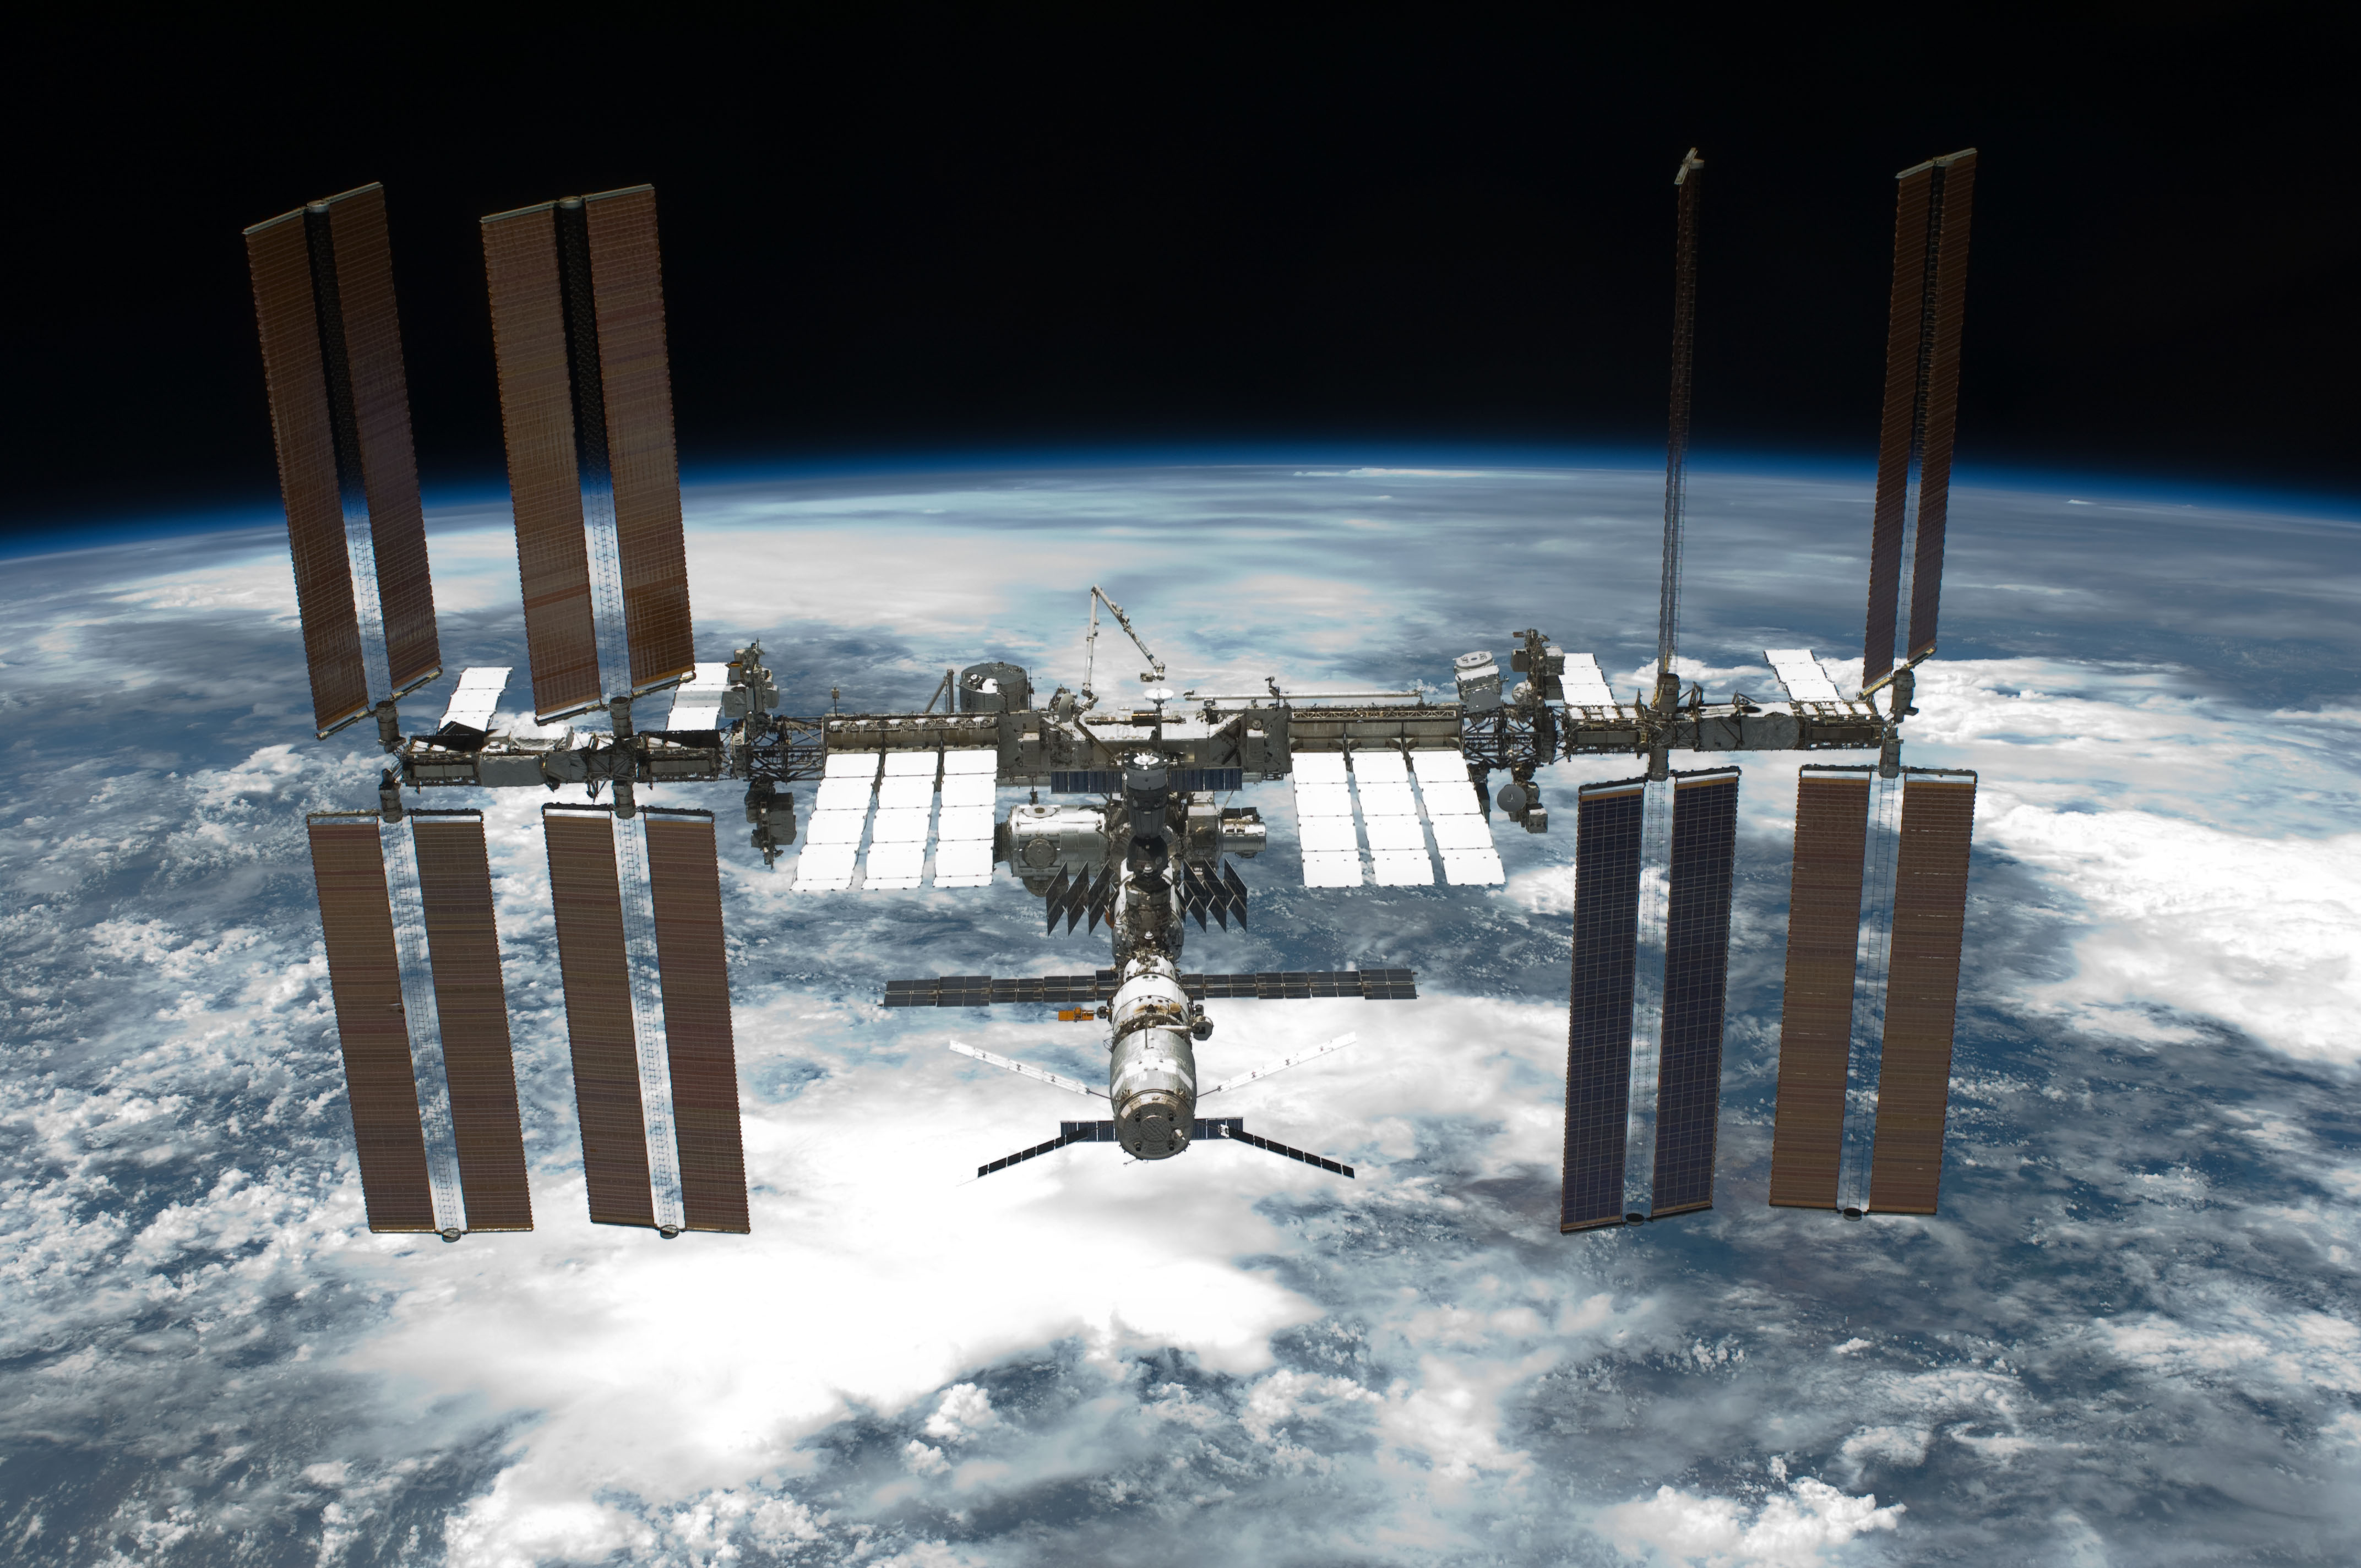 Three Space Station Crews to Answer Media Questions from Orbit | NASA